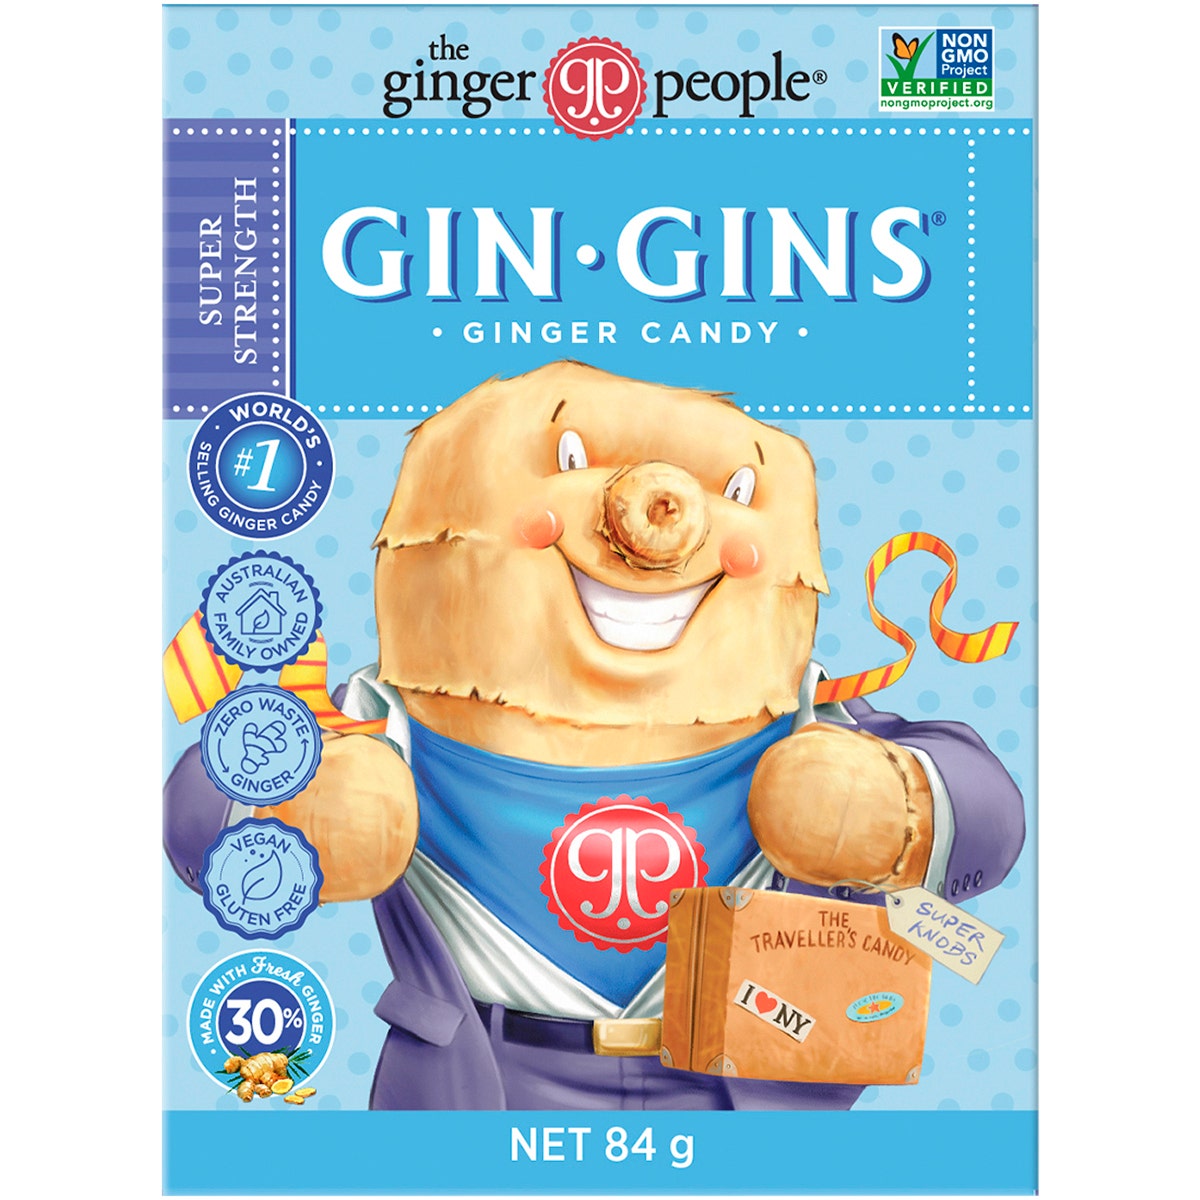 The Ginger People Gin Gins Super Strength Ginger Candy